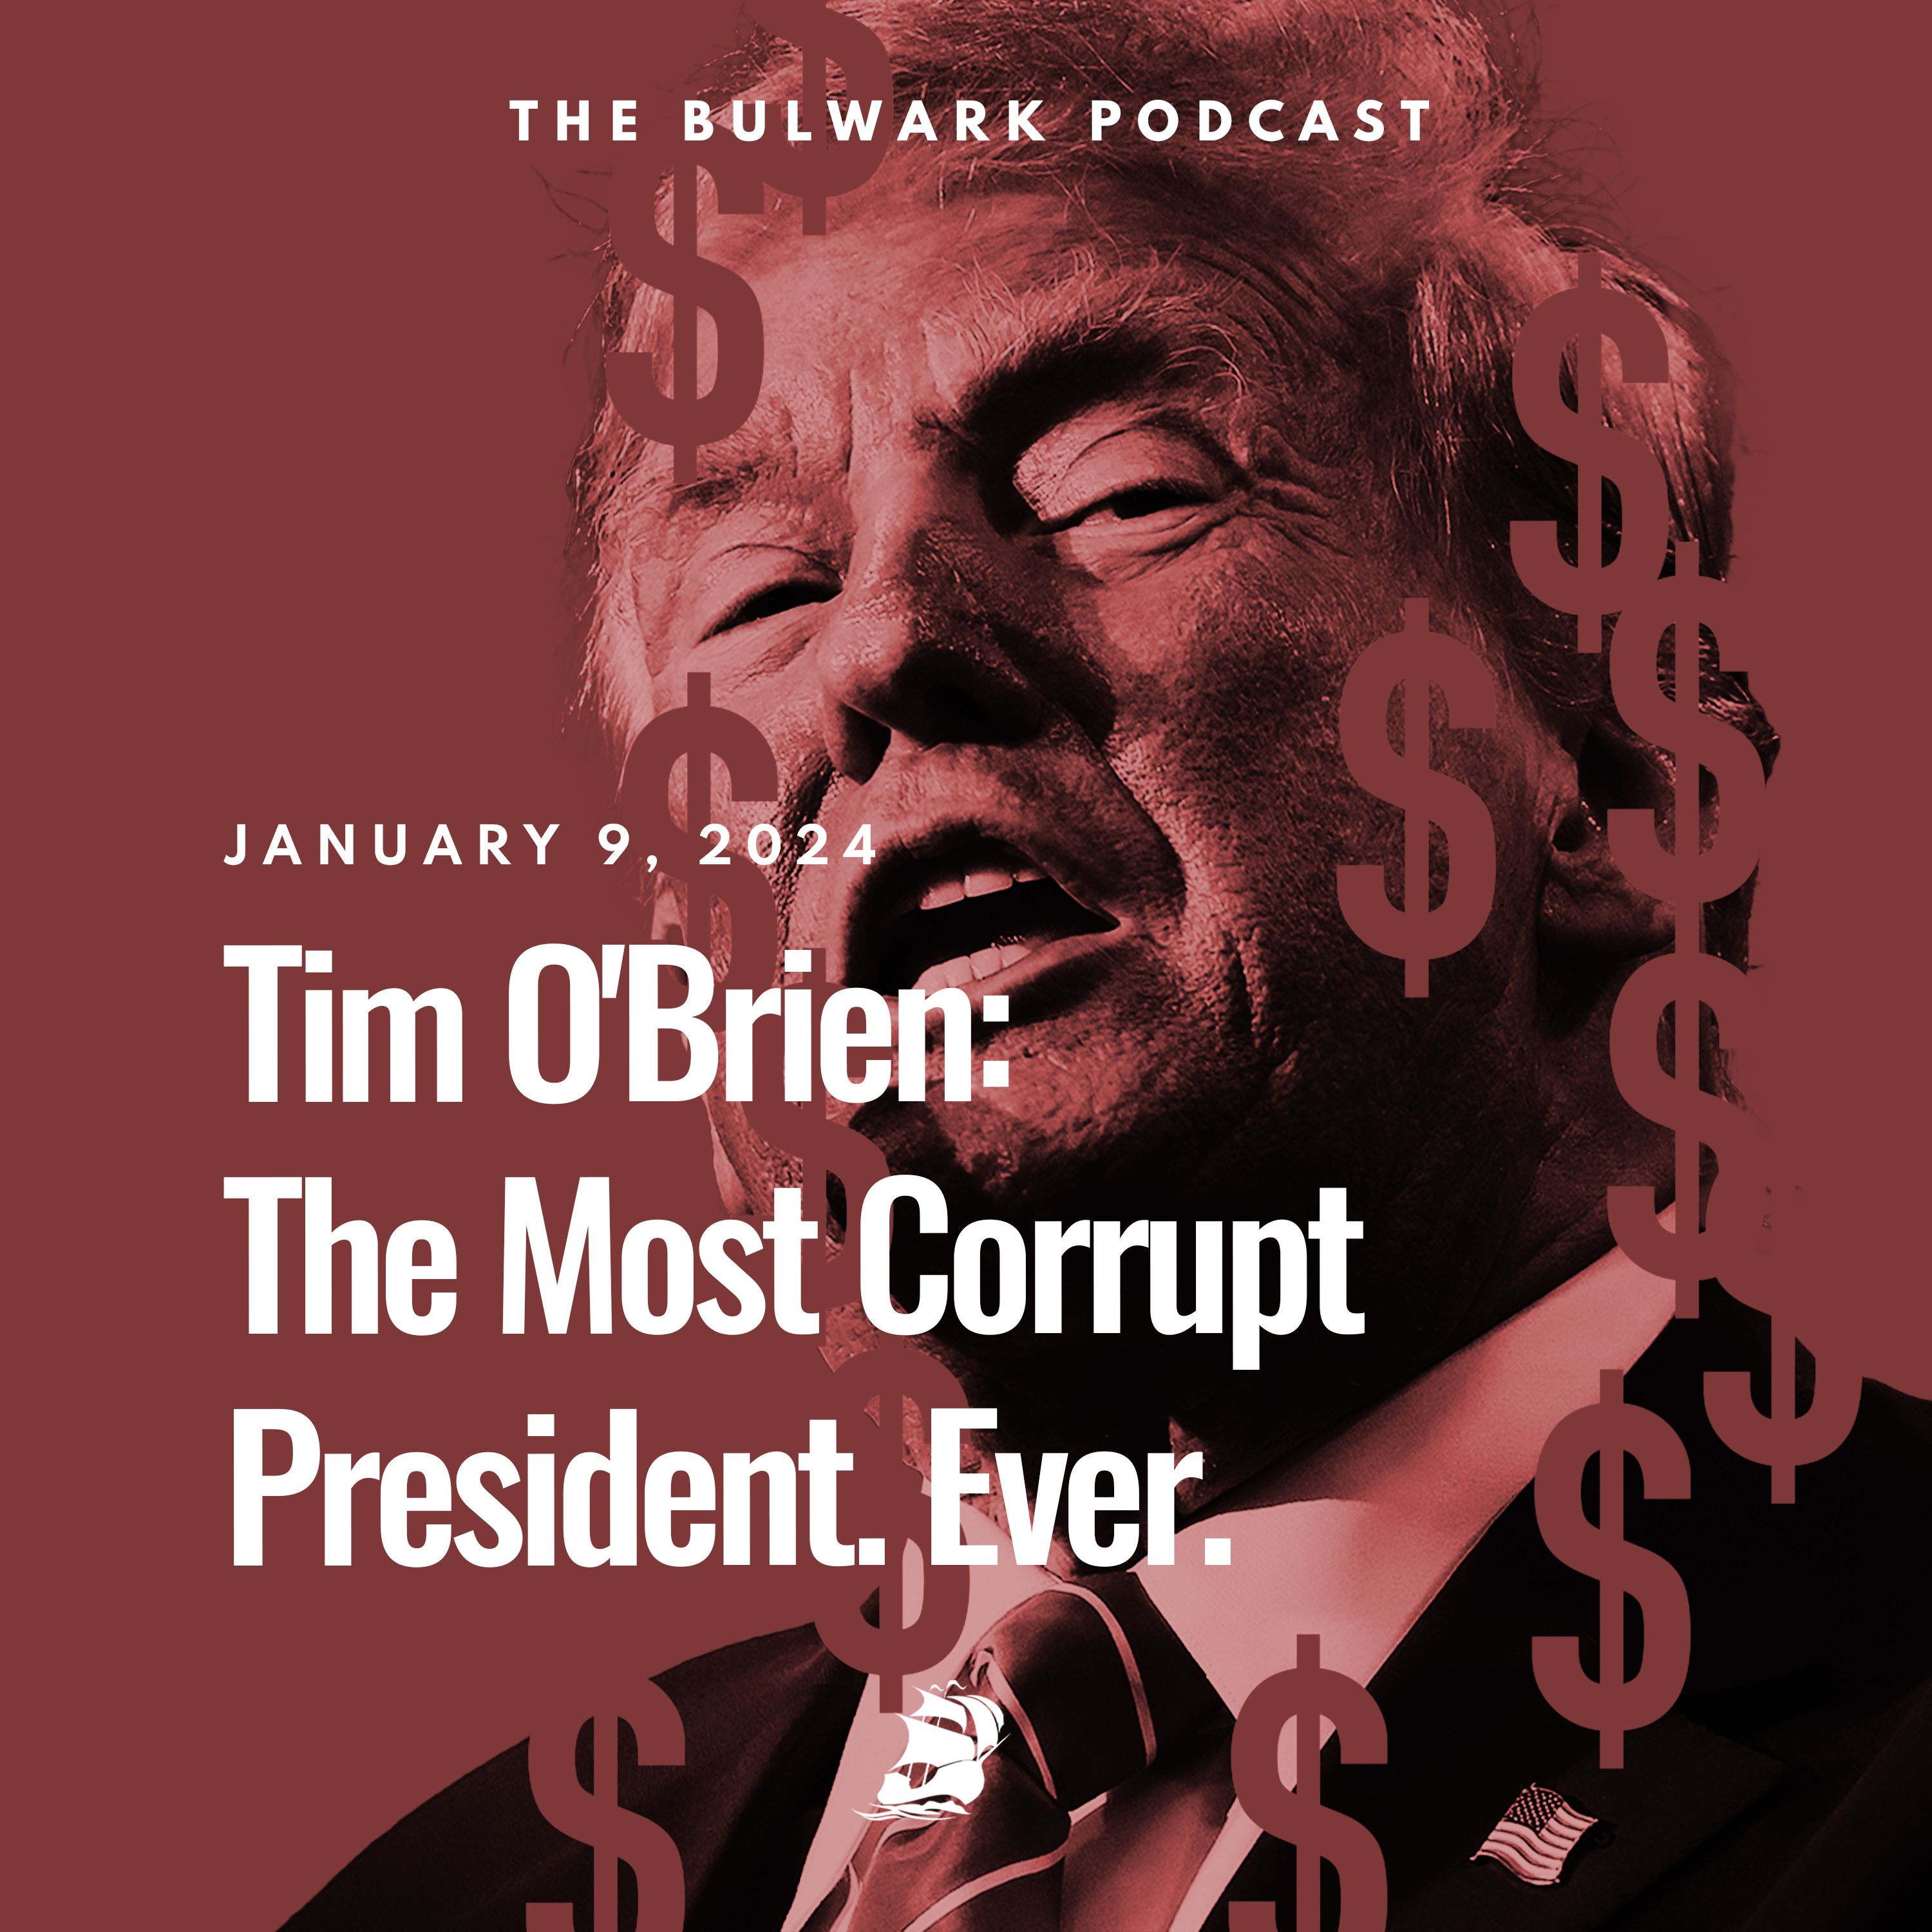 Tim O'Brien: The Most Corrupt President. Ever. by The Bulwark Podcast